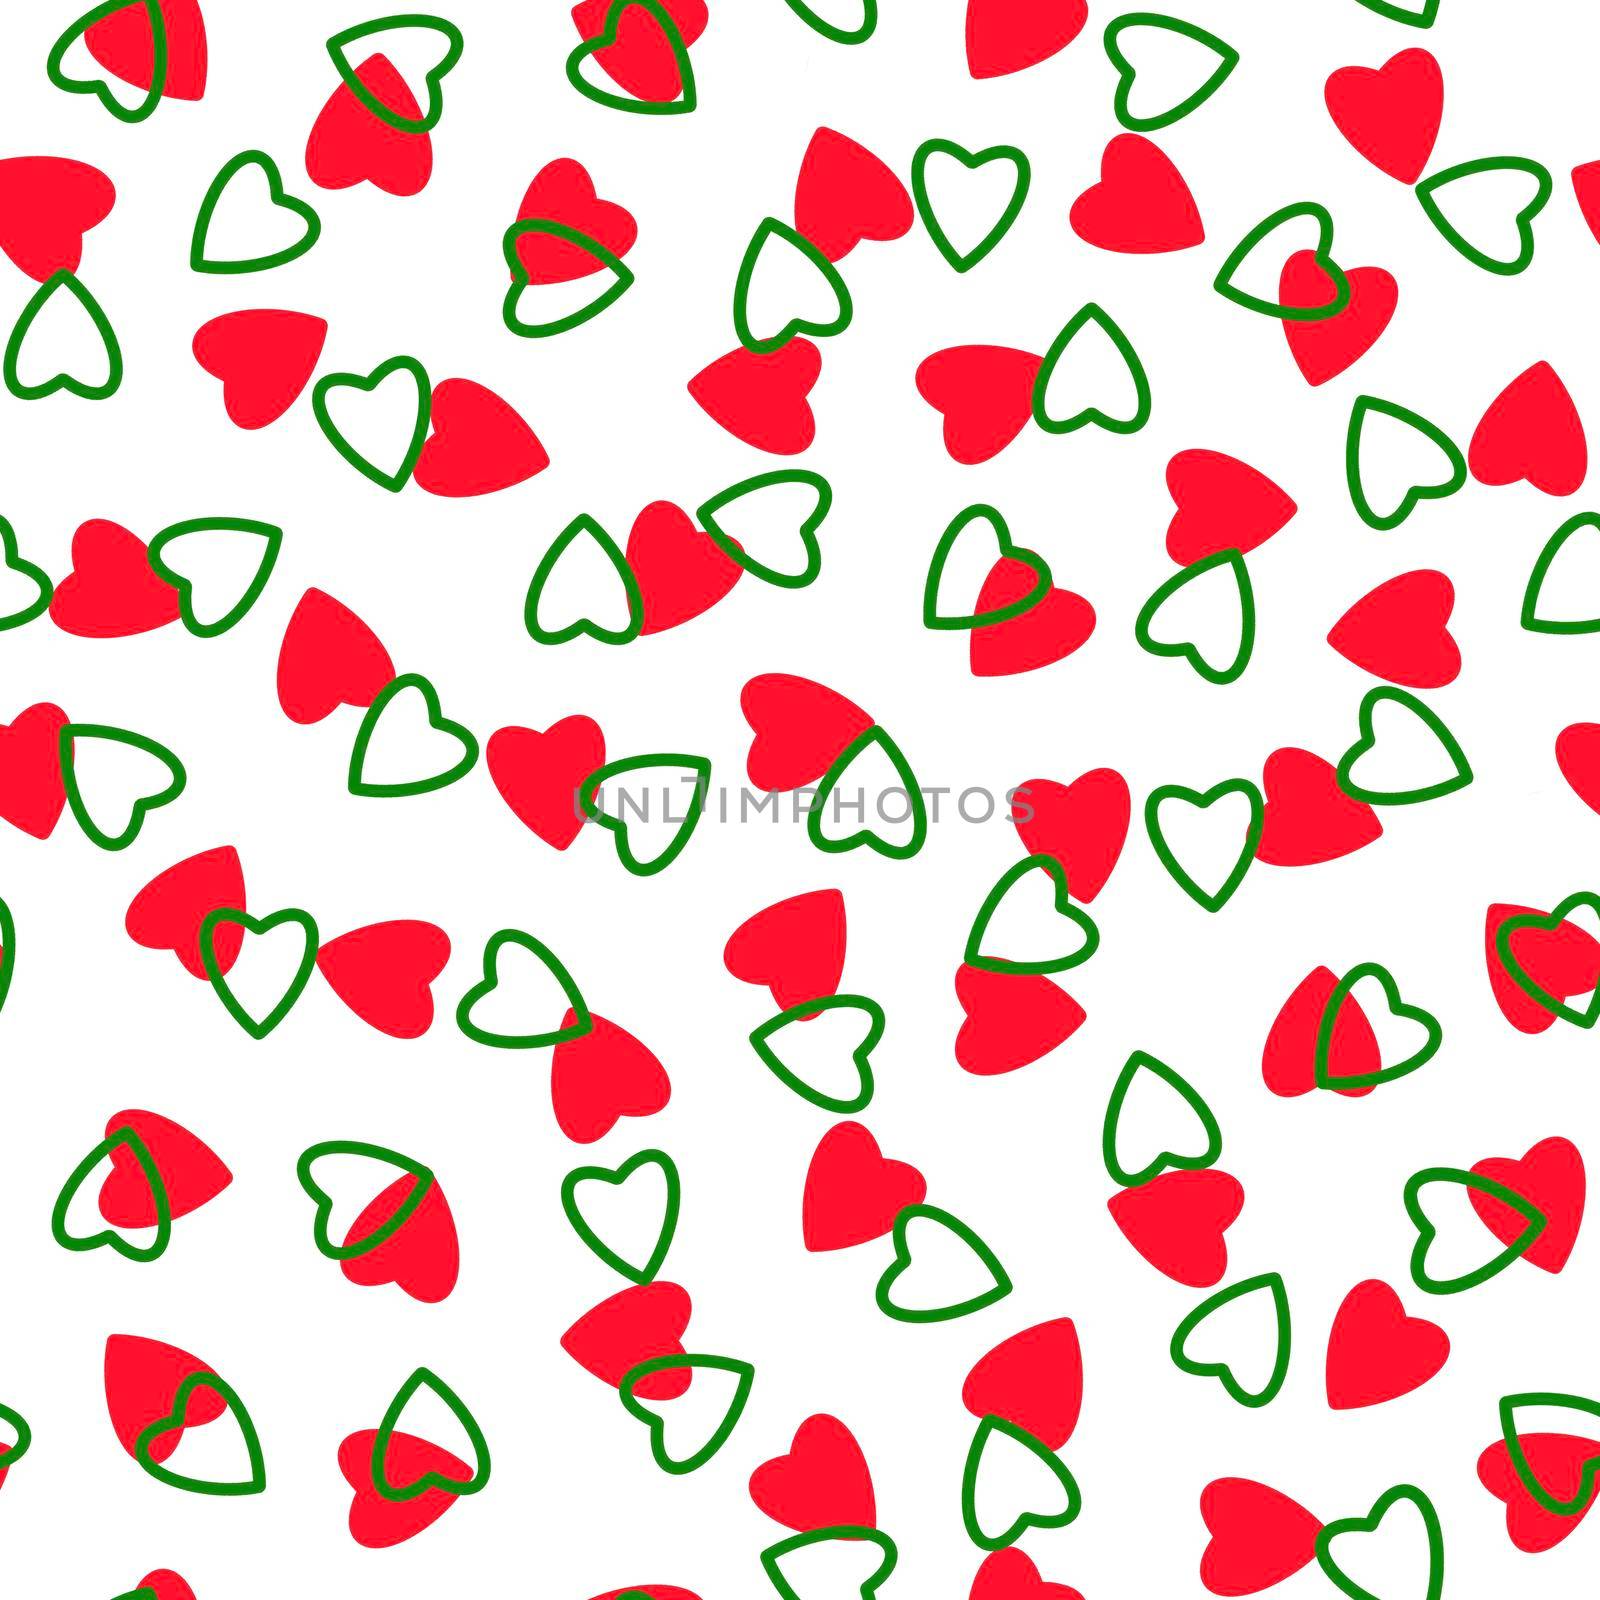 Simple hearts seamless pattern,endless chaotic texture made of tiny heart silhouettes.Valentines,mothers day background.Great for Easter,wedding,scrapbook,gift wrapping paper,textiles.Red,green,white by Angelsmoon